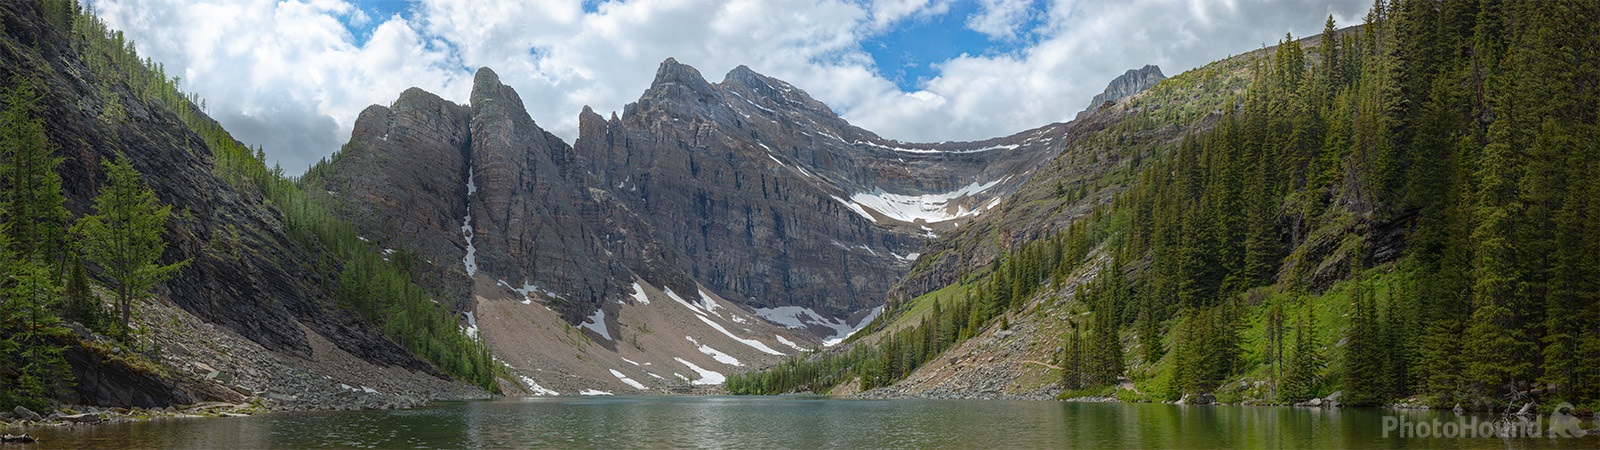 Image of Lake Agnes from the Teahouse by John Freeman